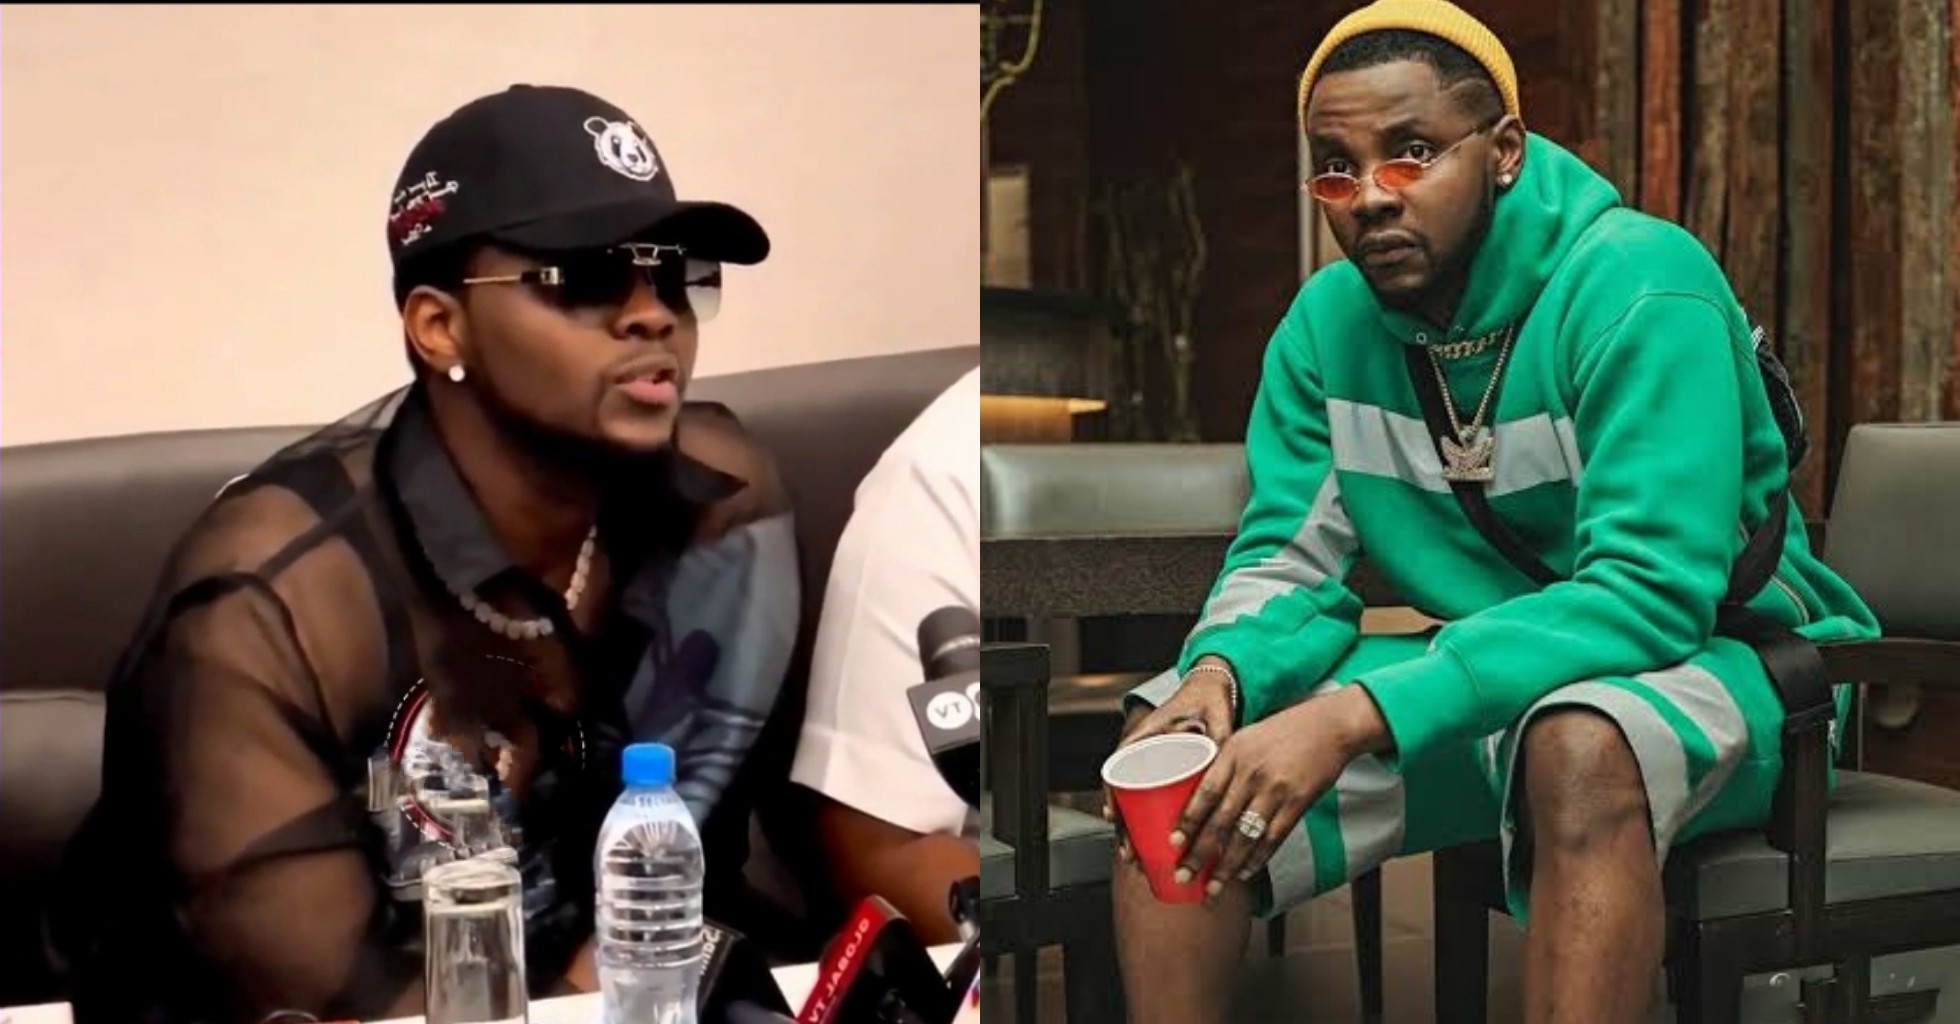 Kizz Daniel tells side of story, apologizes for failing to turn up at his concert in Tanzania